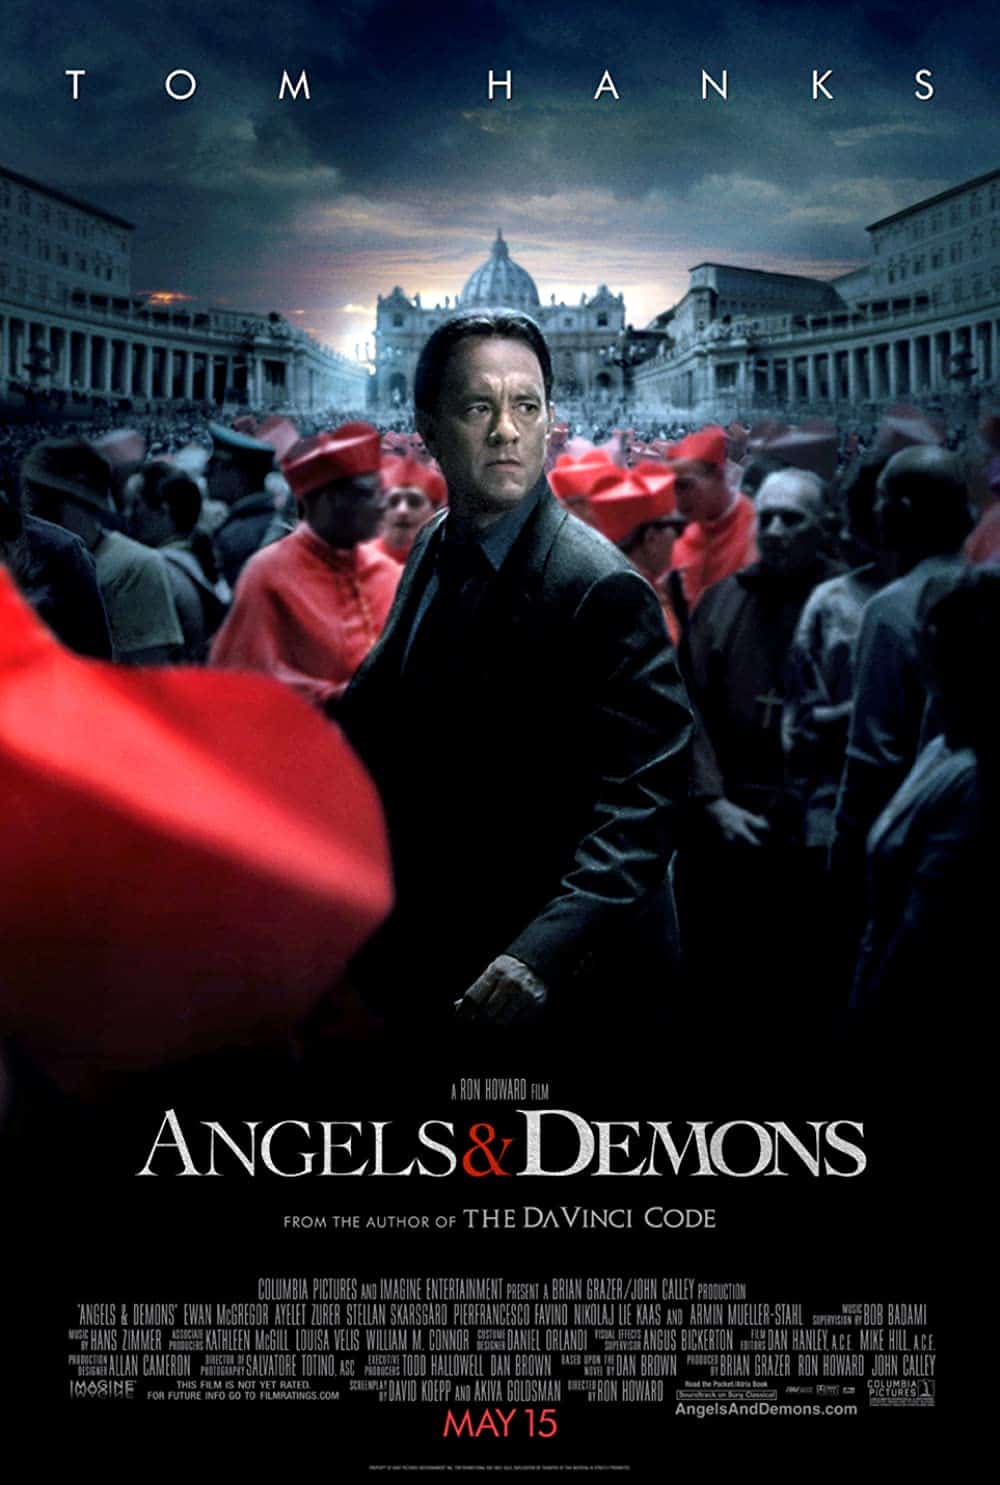 Angels and Demons (2009) Best Movies About Rome to Watch and Re-Watch